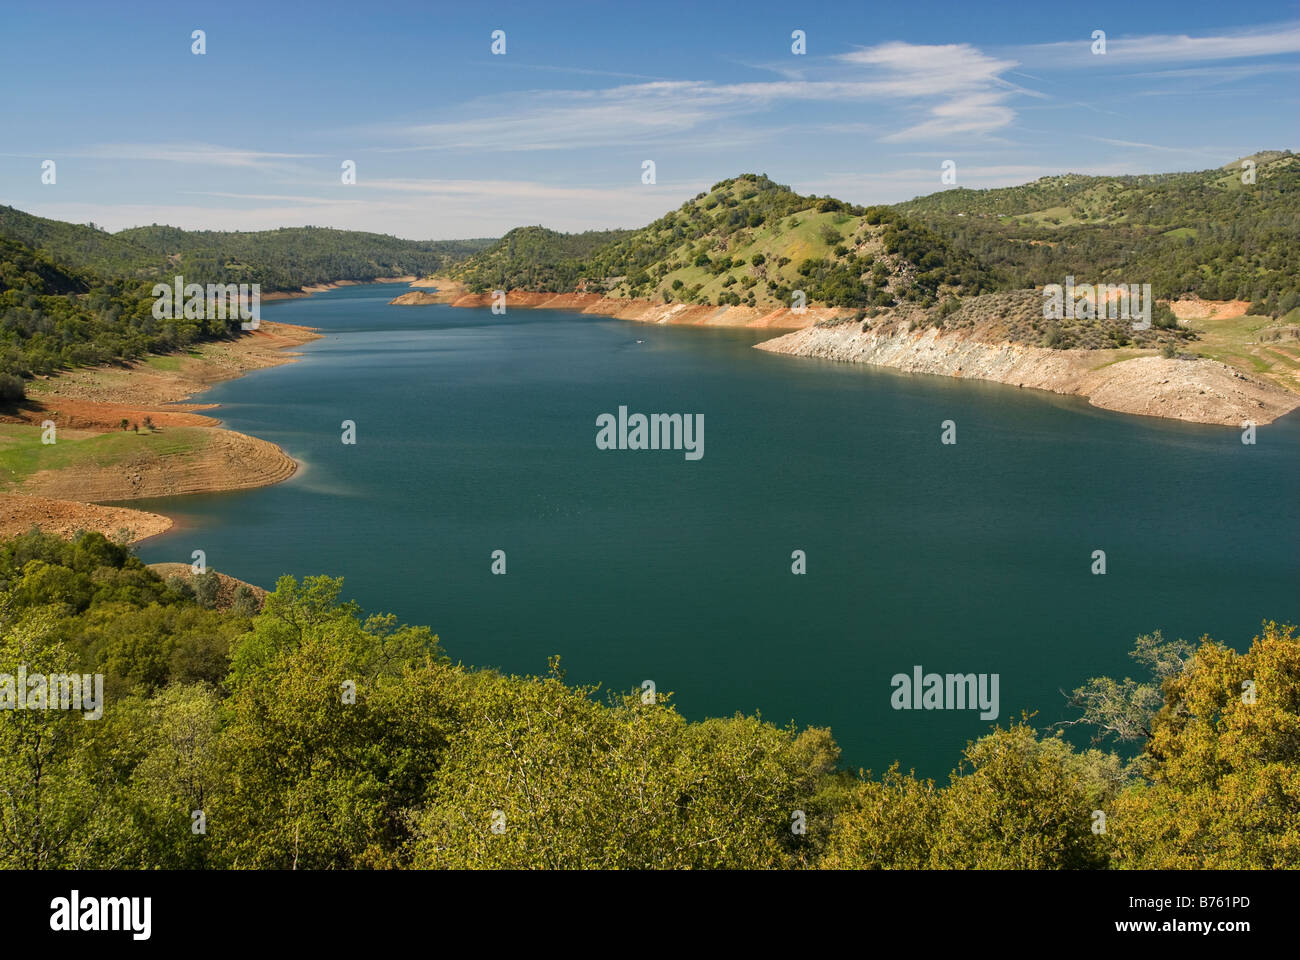 Low water level at Don Pedro Reservoir on Tuolumne River Gold Country California USA Stock Photo